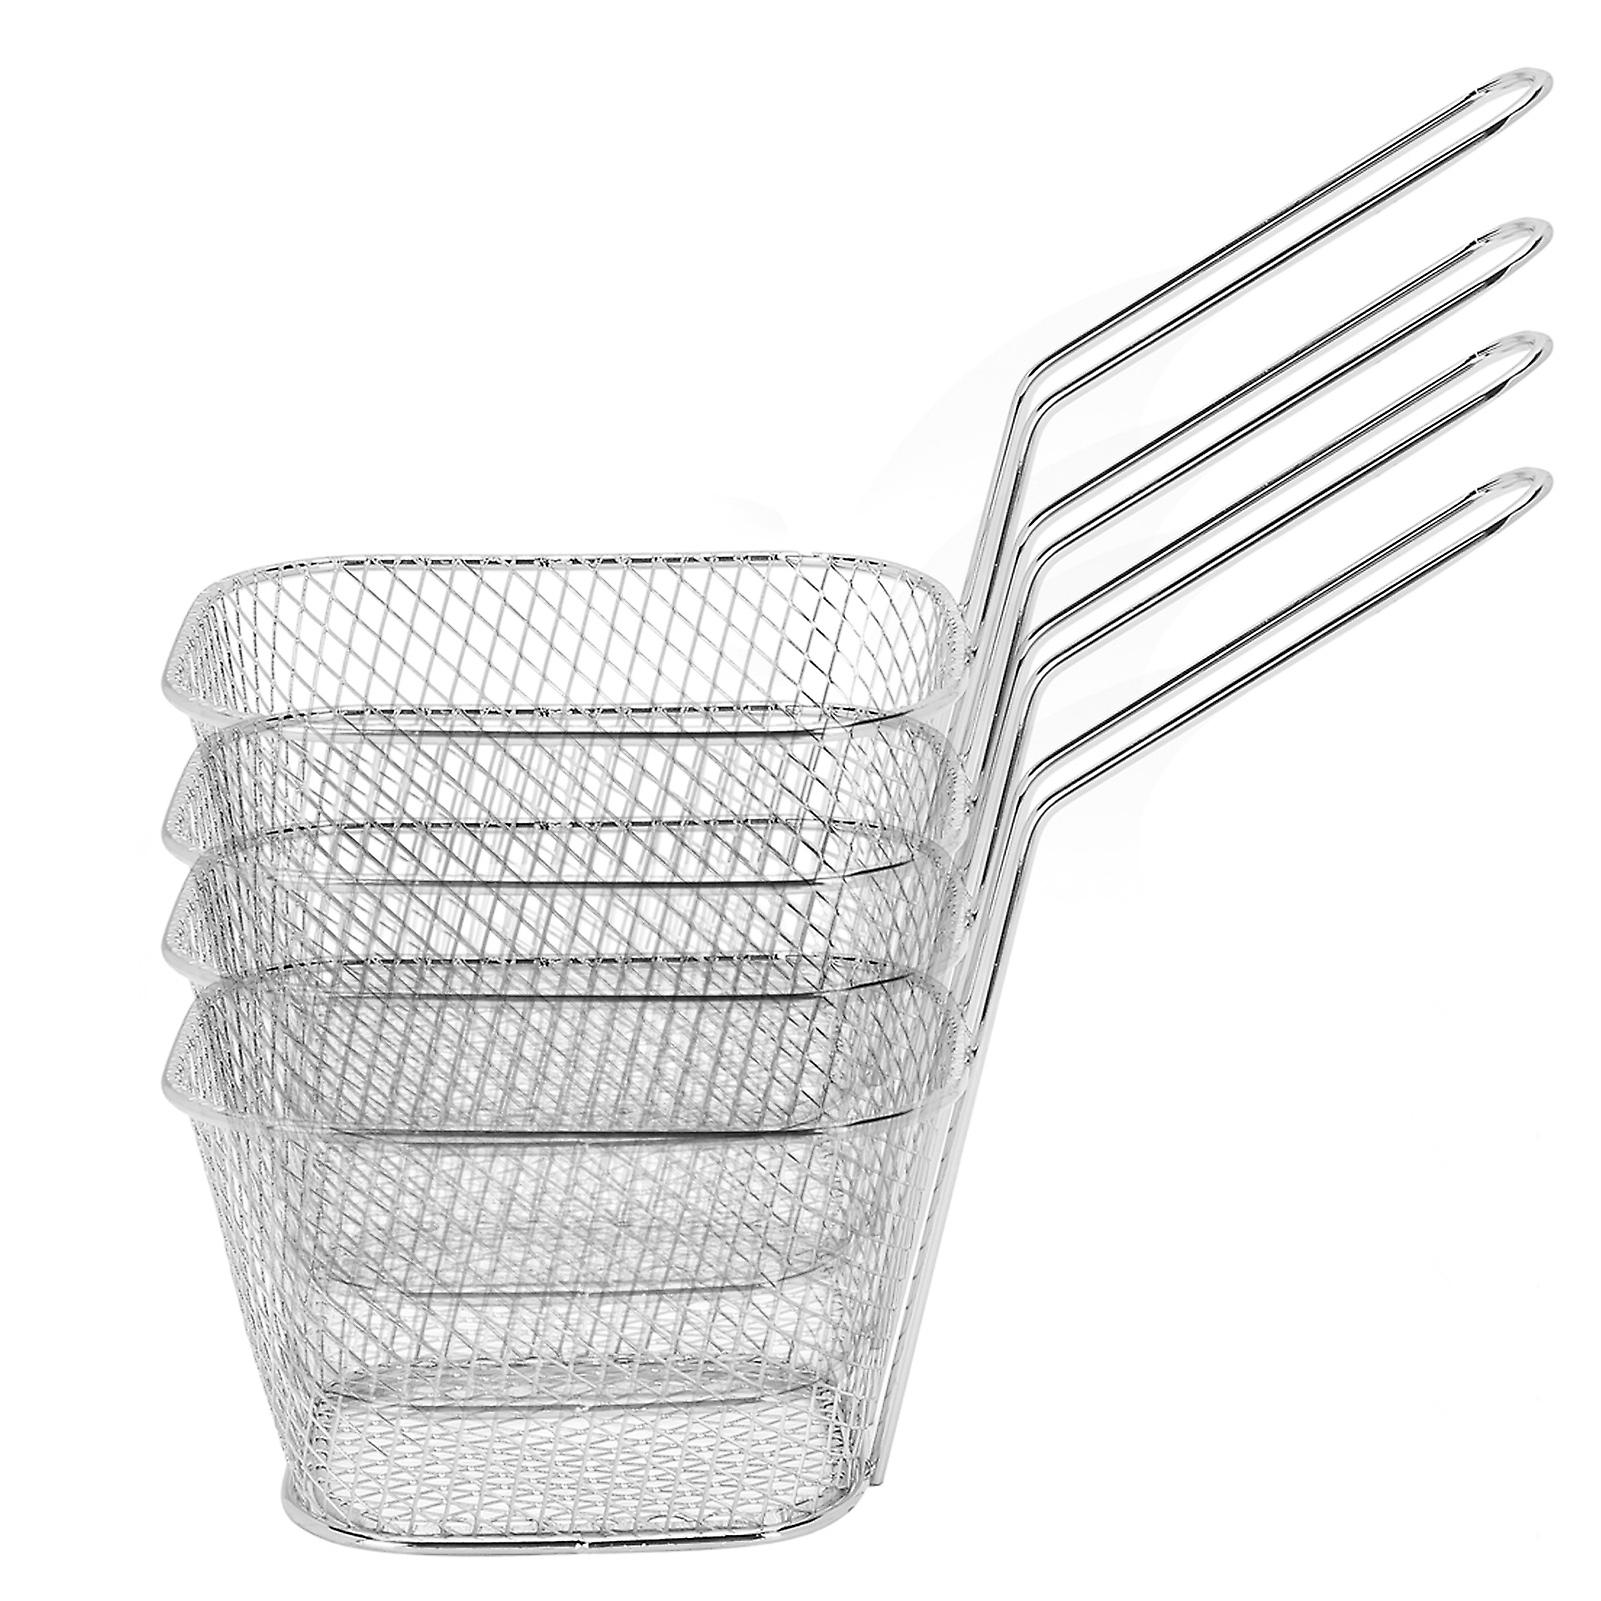 4Pcs Stainless Steel Frying Net Basket Cooking Strainer for French Fries Food Kitchen ToolSilver